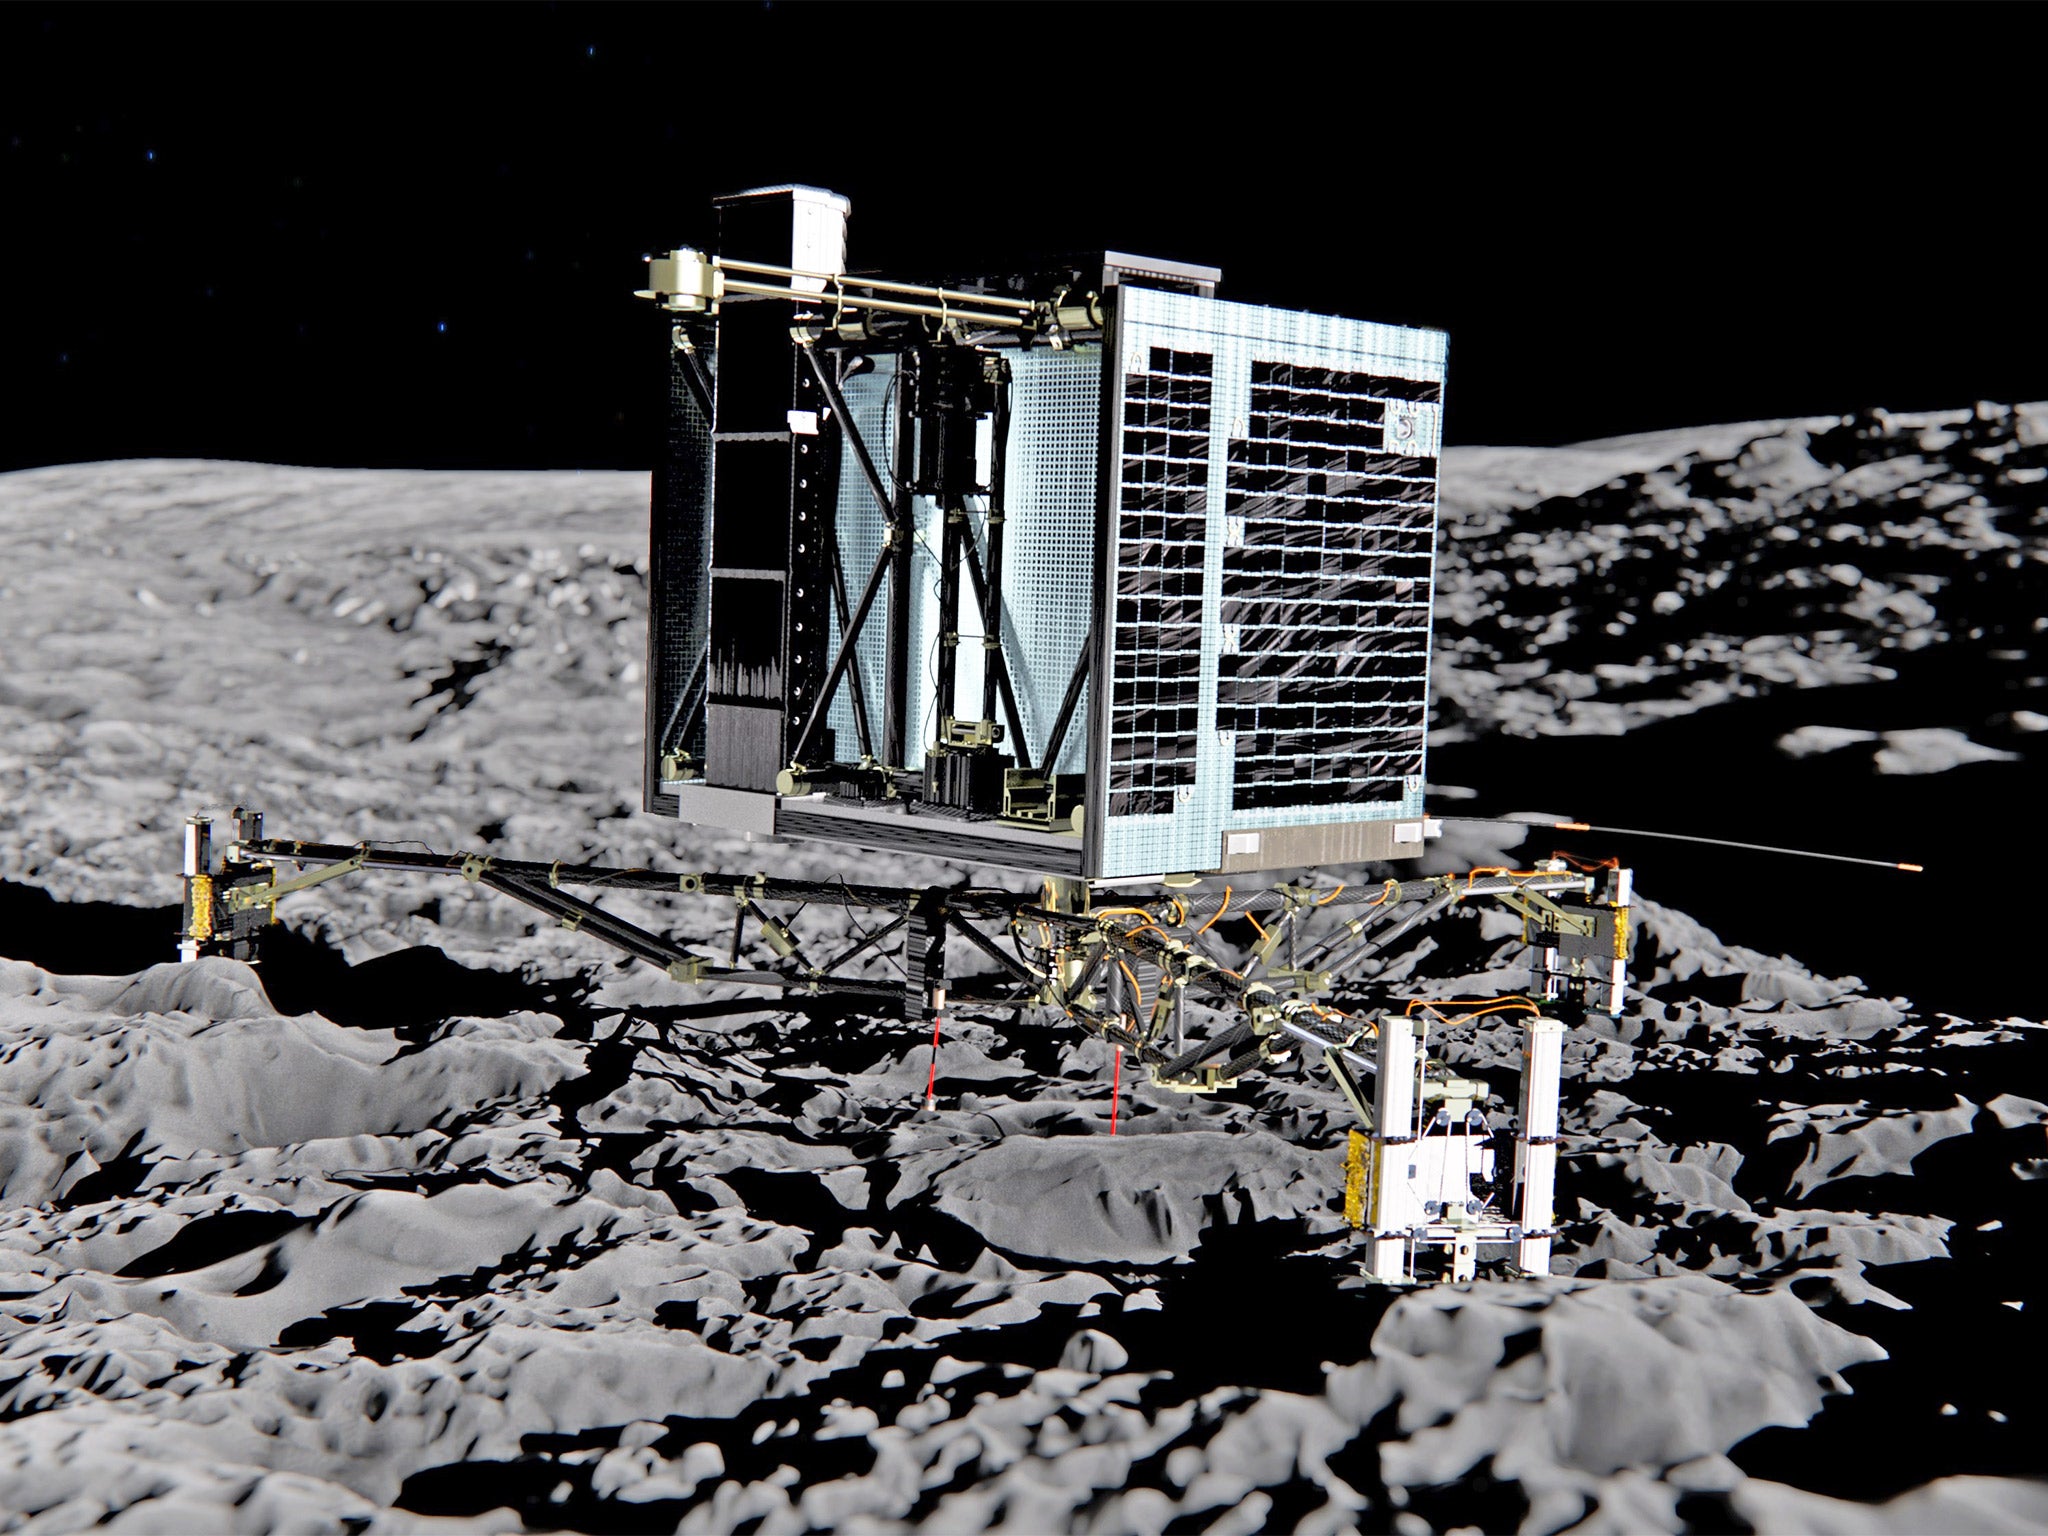 An artist impression of Rosetta's lander Philae on the surface of comet